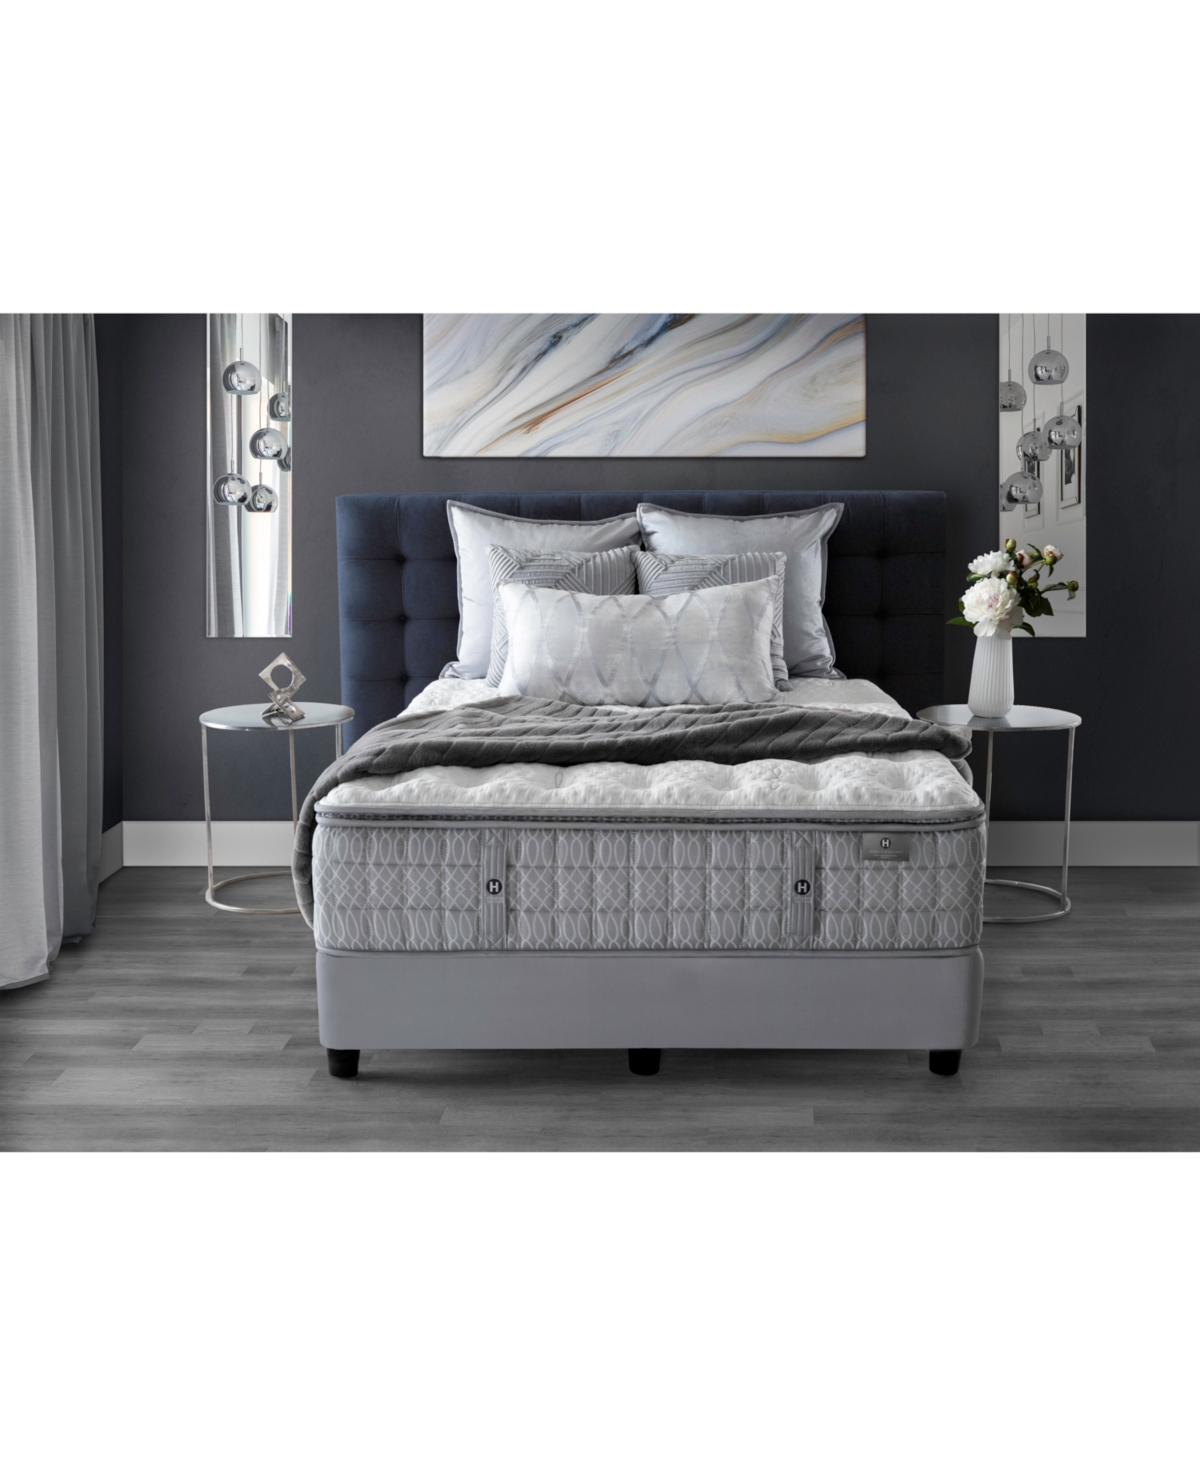 Hotel Collection By Aireloom Holland Maid Coppertech Silver Natural 14.5" Plush Luxe Top Mattress Set- Queen, Created In No Color